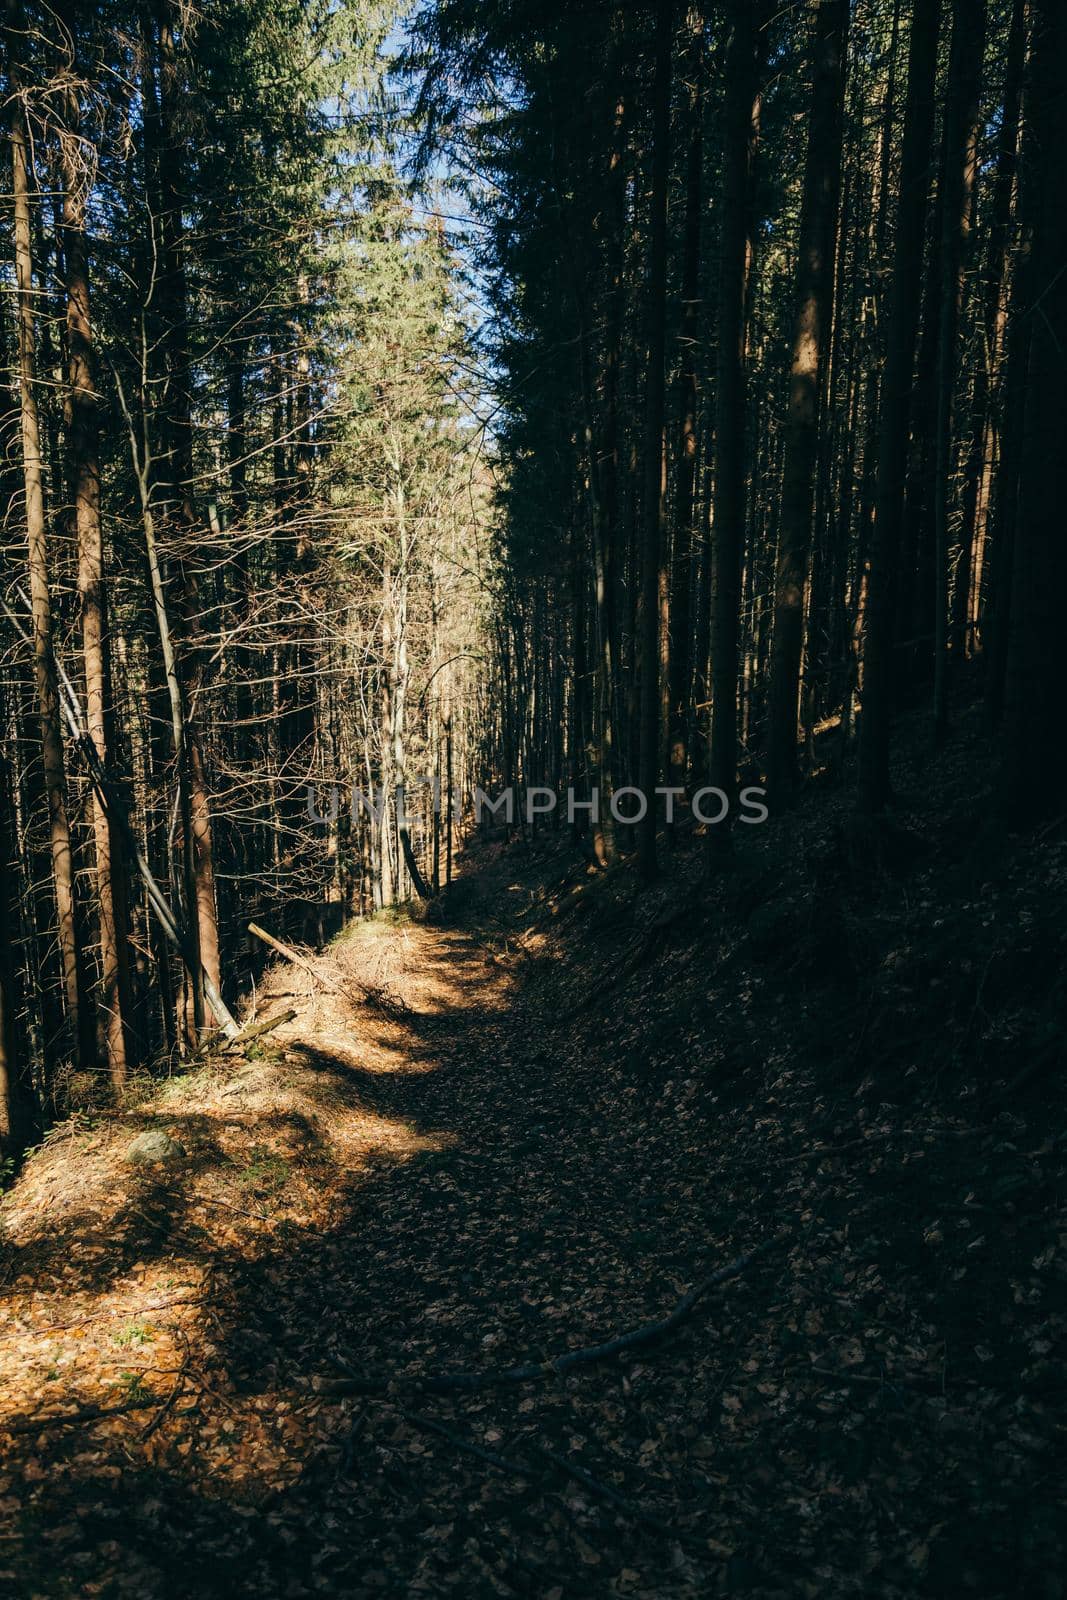 Mountain road with stones and coniferous forest, old road by Dmytro125